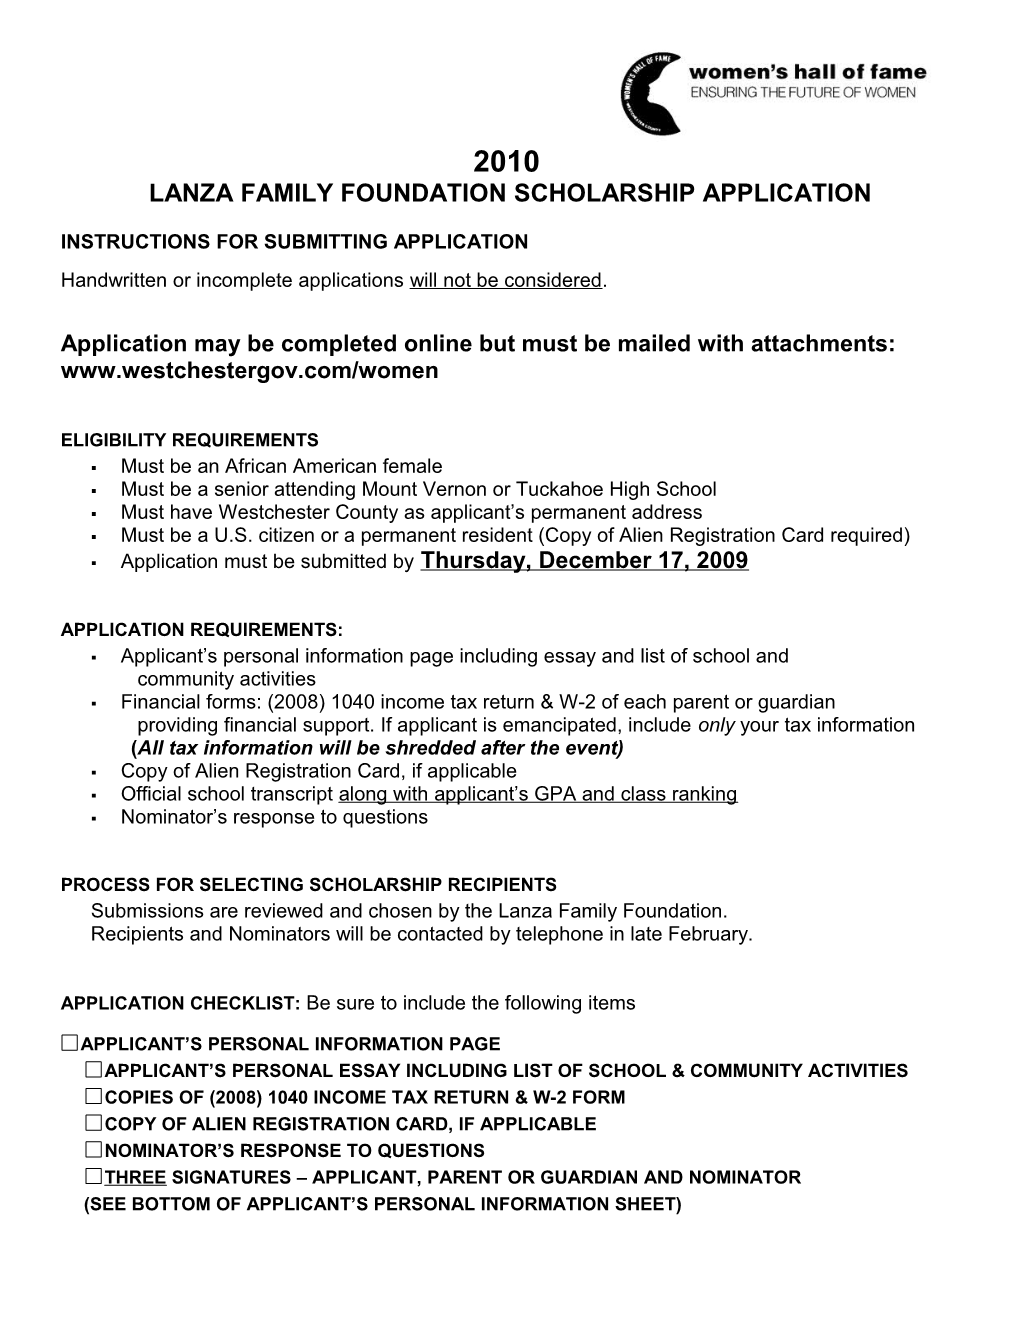 2005 Women S Hall of Fame Scholarship Application